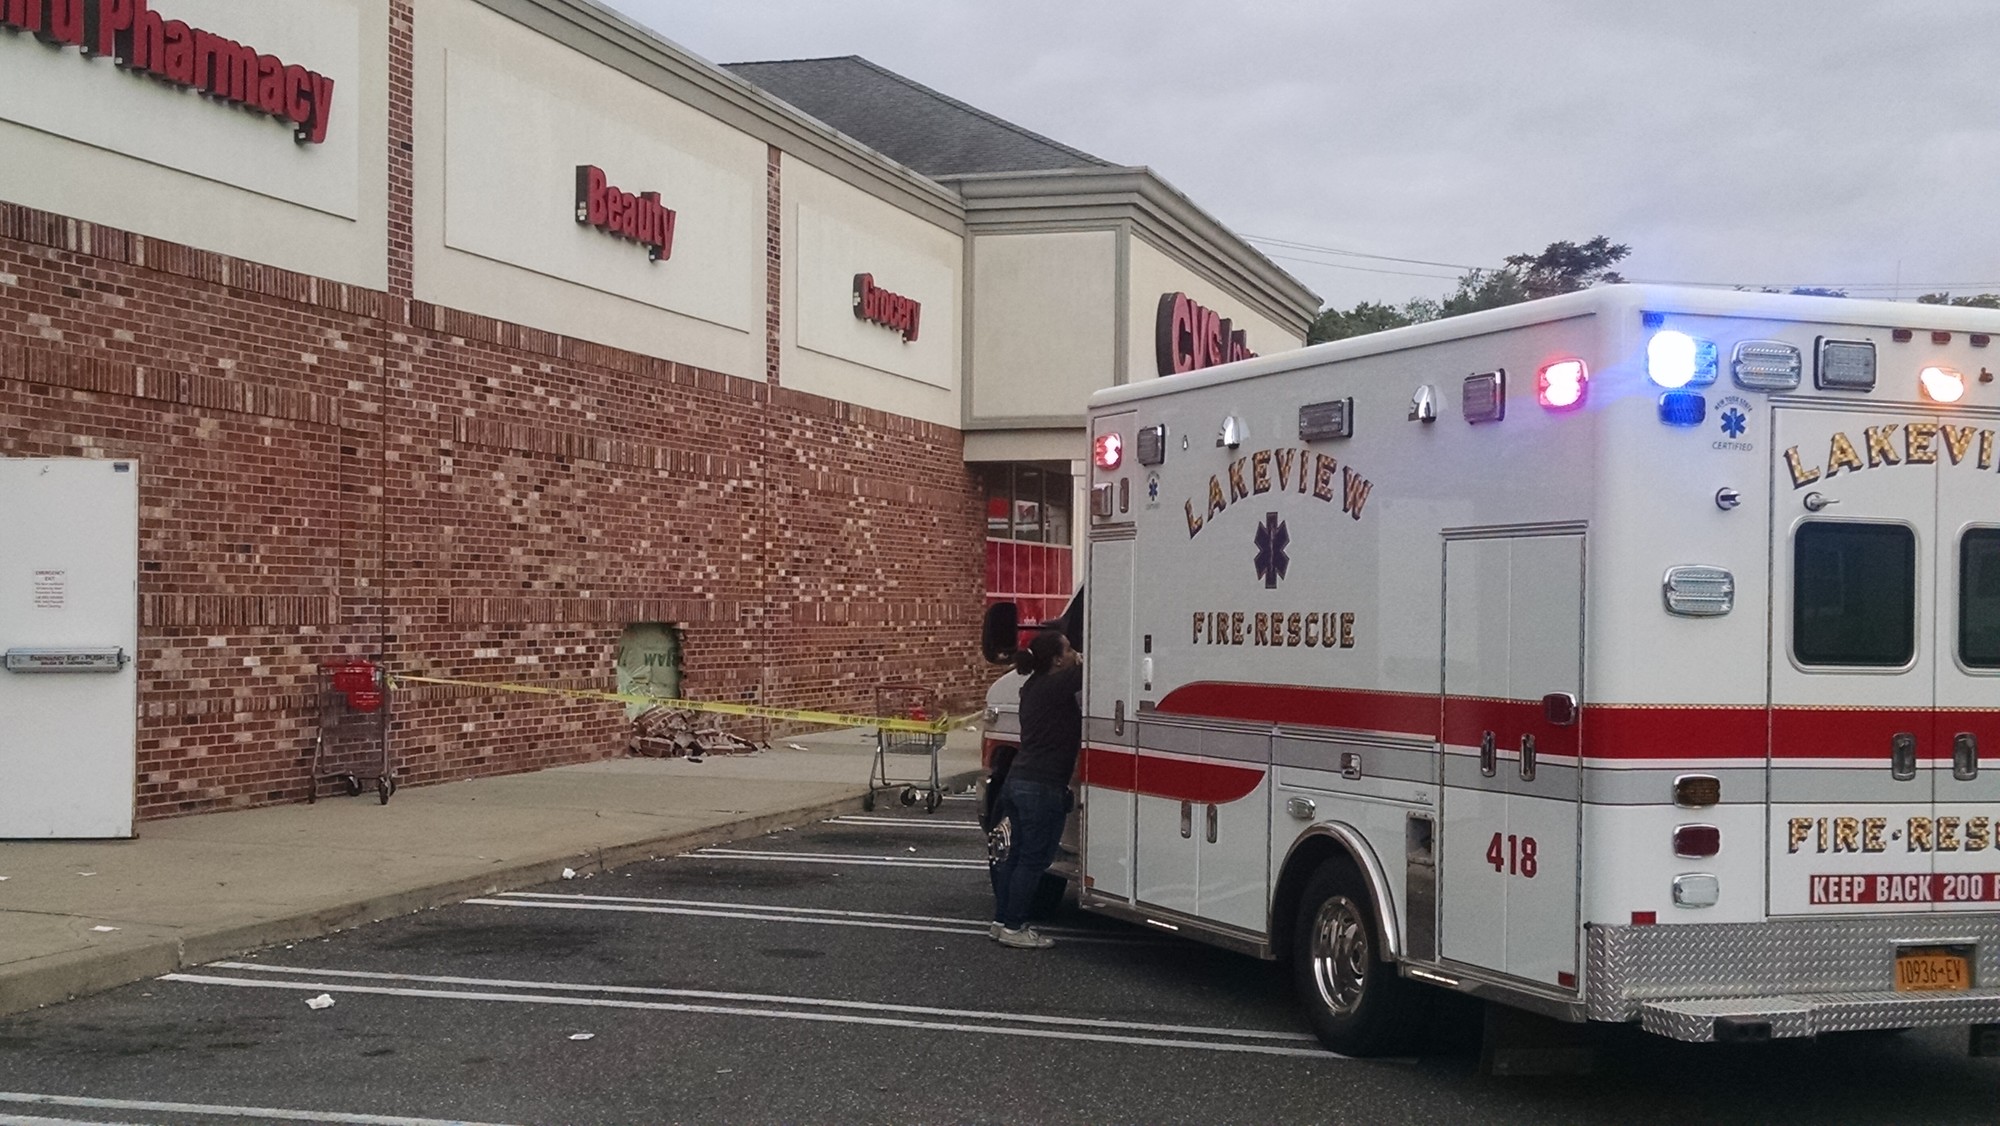 A Lexus SUV smashed into the wall of the CVS in West Hempstead last Friday evening.